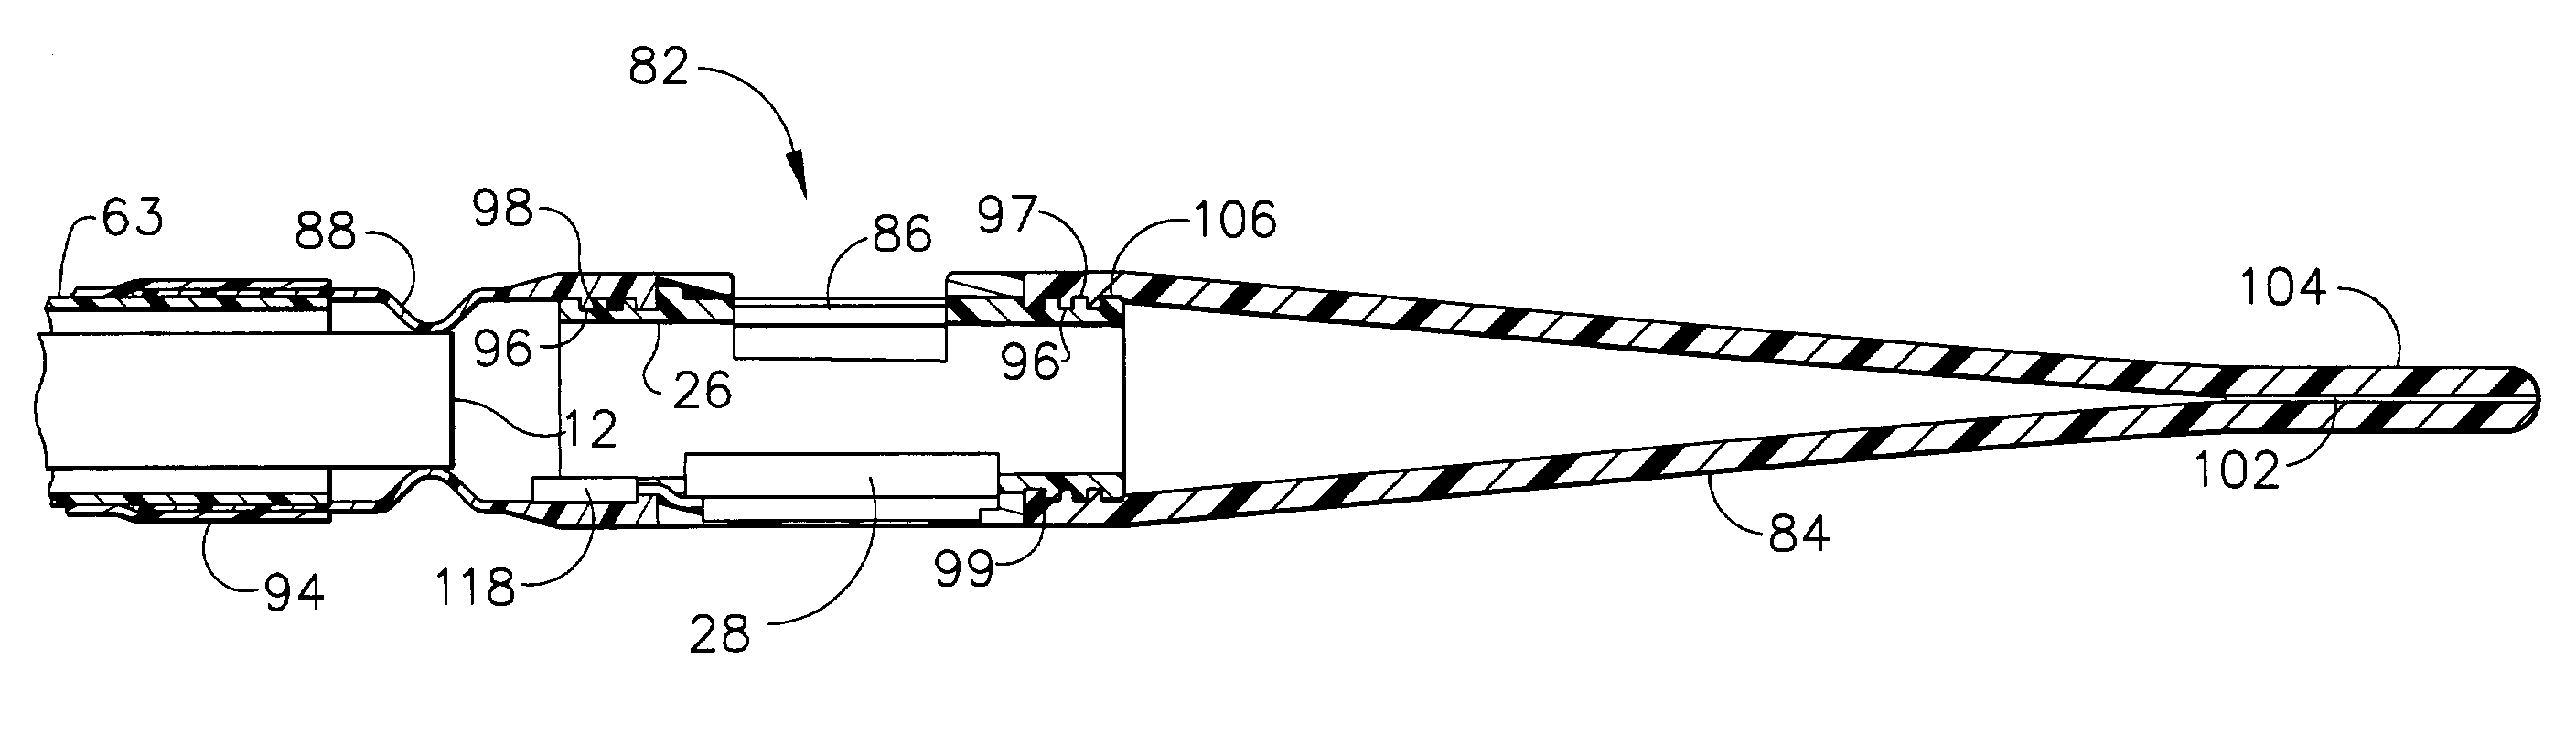 Endoscopic ablation system with a distally mounted image sensor